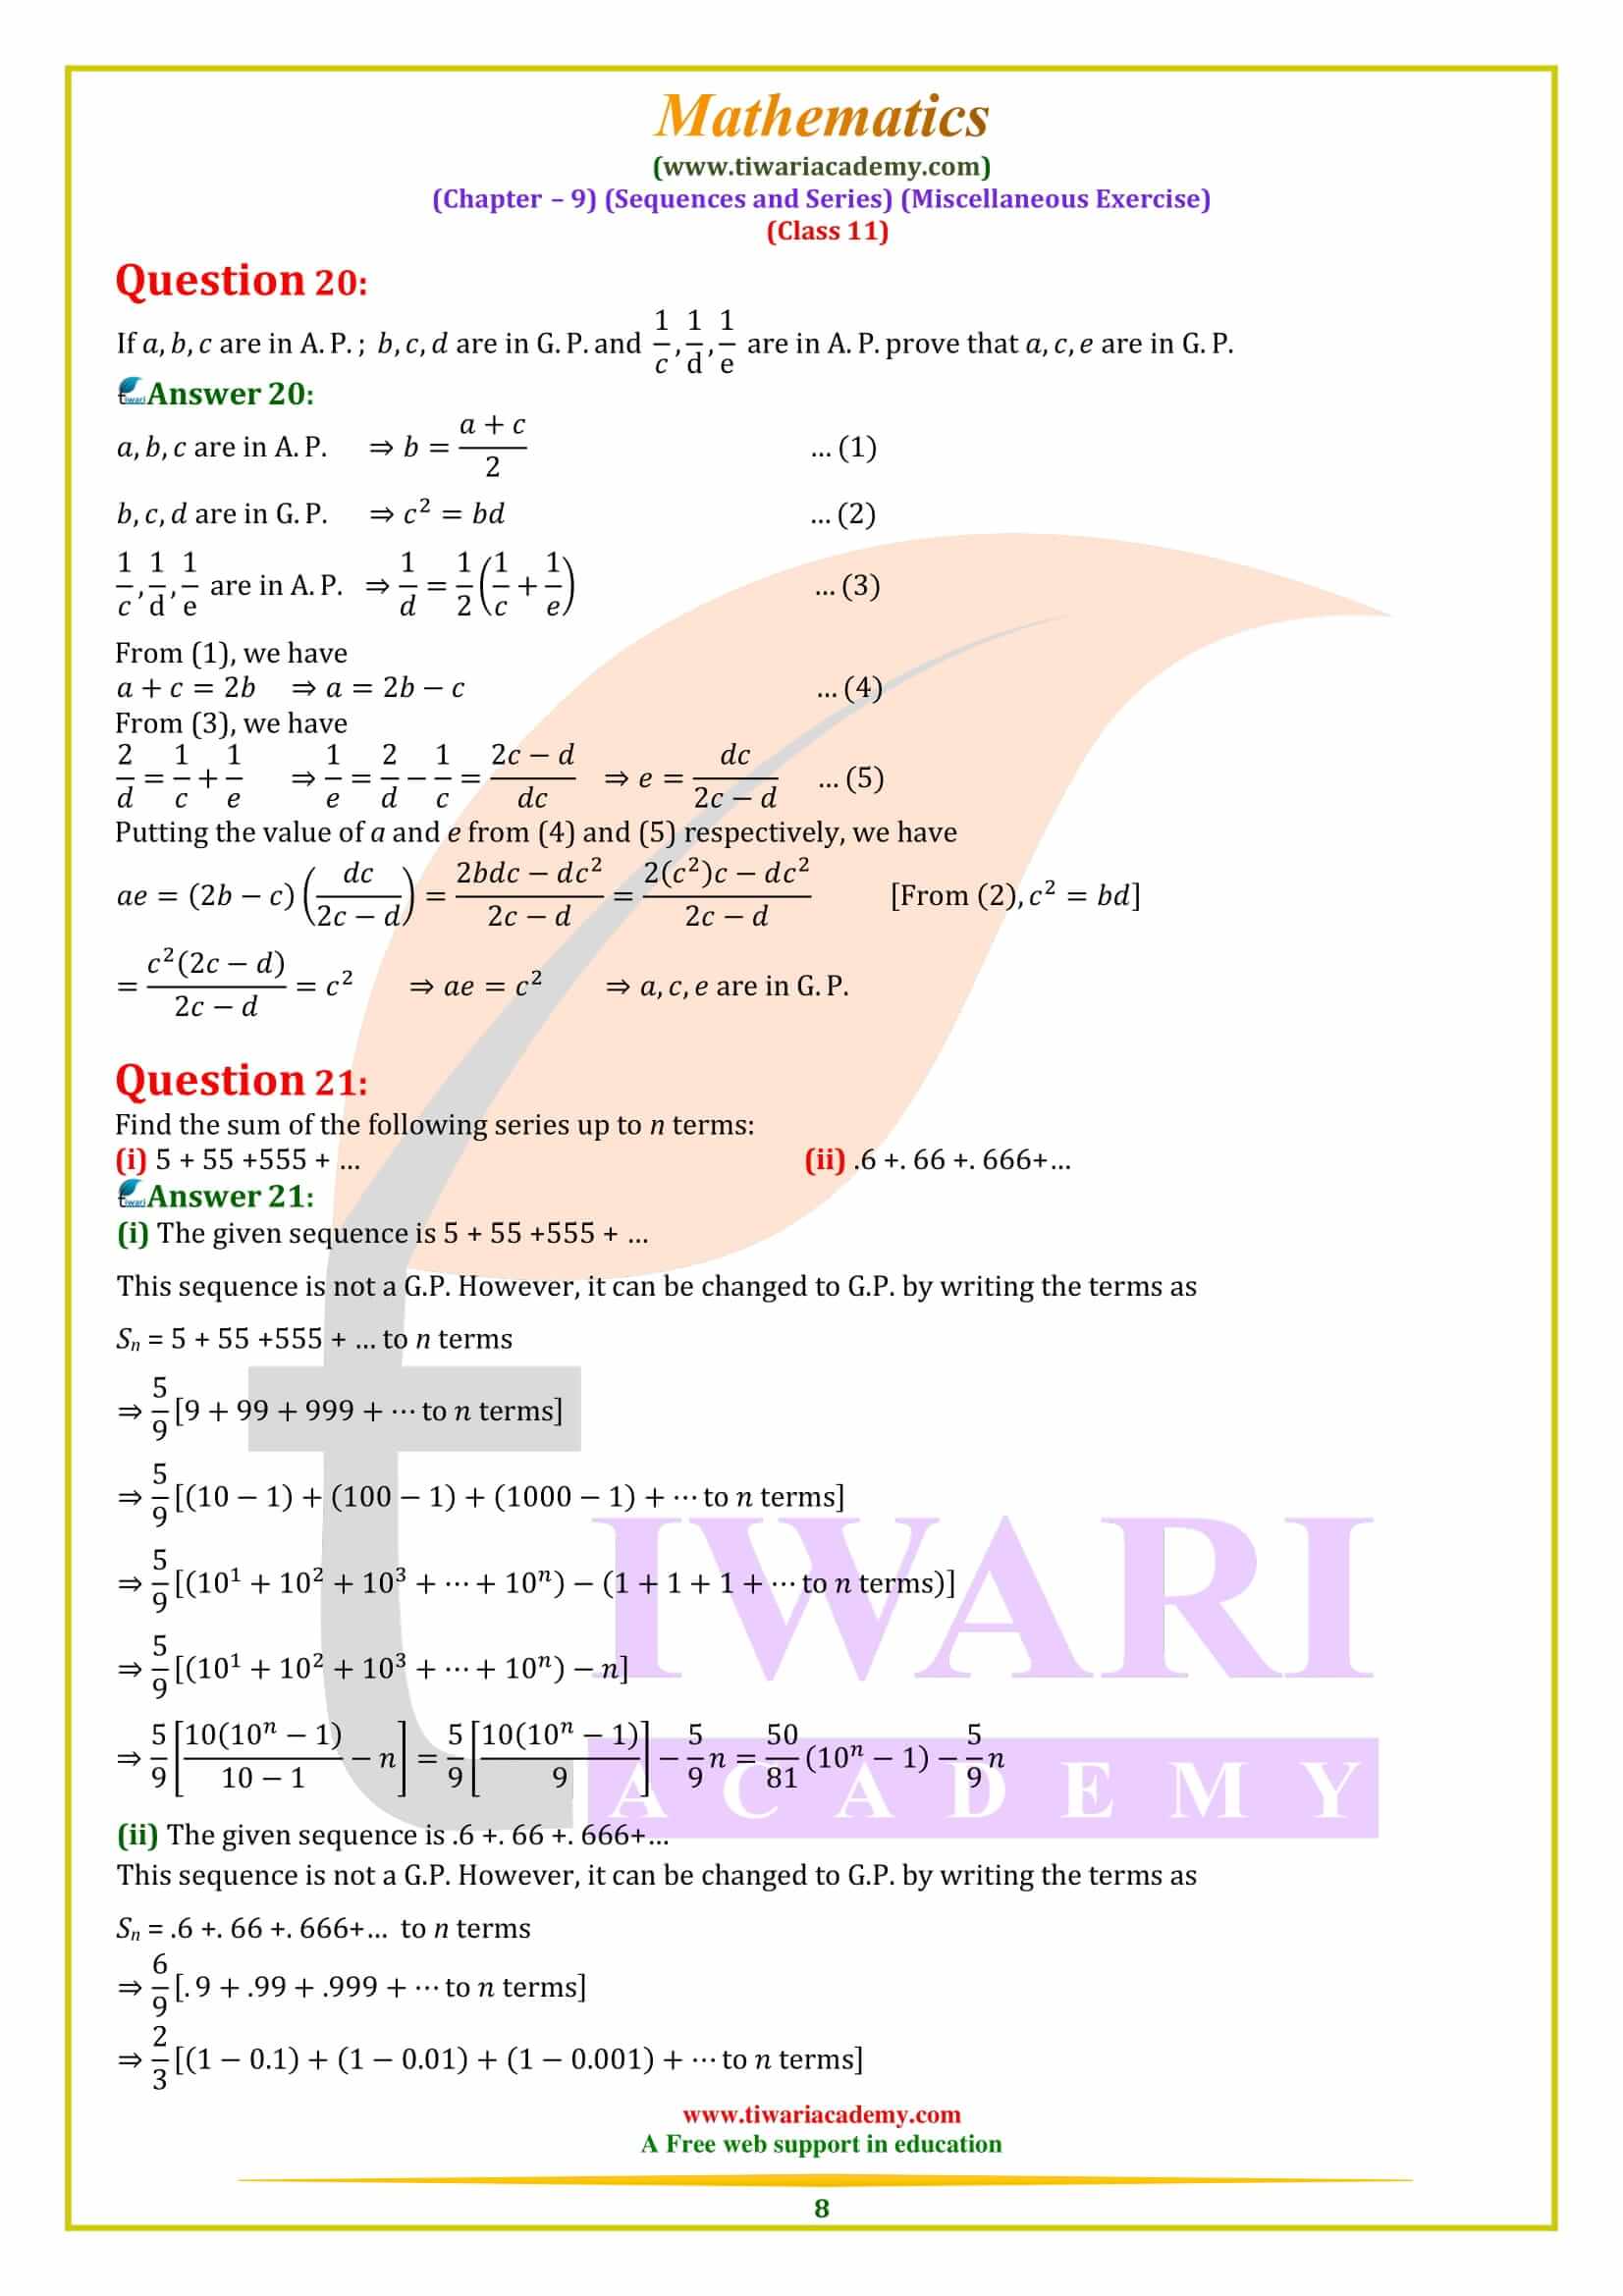 NCERT Solutions for Class 11 Maths Chapter 9 Miscellaneous Exercise free download